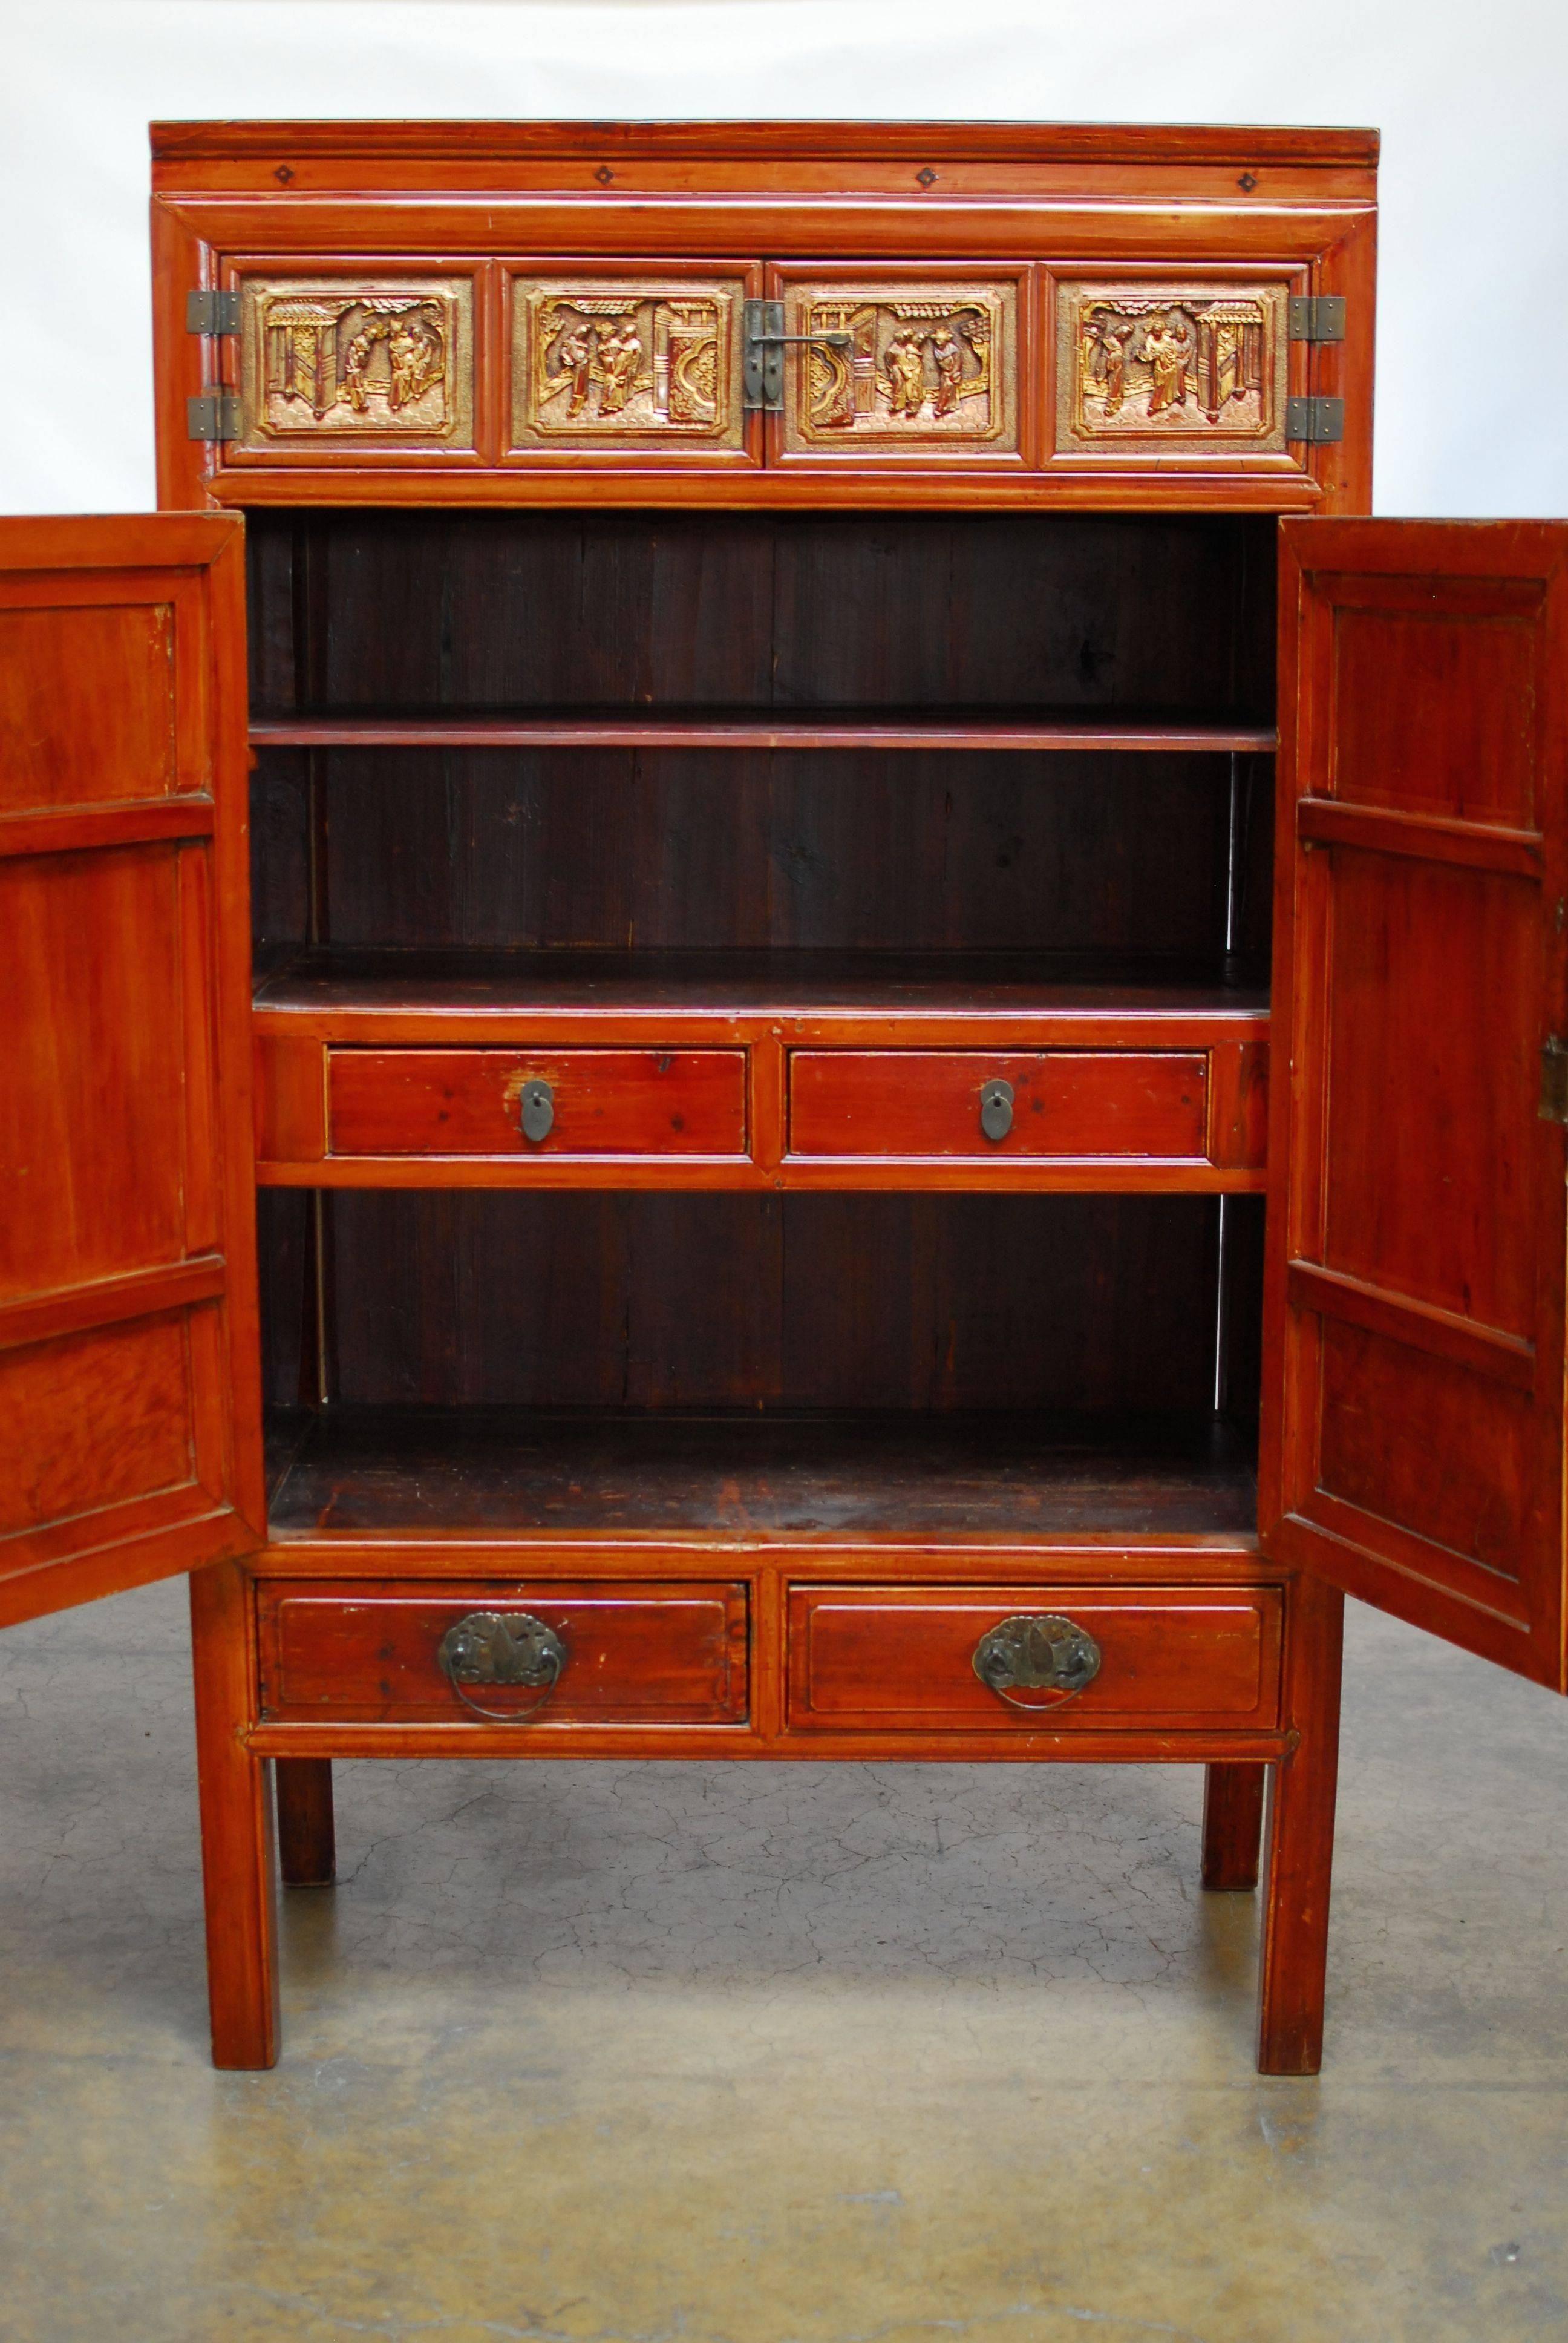 Chinese export cabinet with two large decorated doors carved and finished in black lacquer and gilt trim. Two small doors on top decorated with carved social scenes and adorned with gilt trim. Interior has three large shelves and is fronted by two